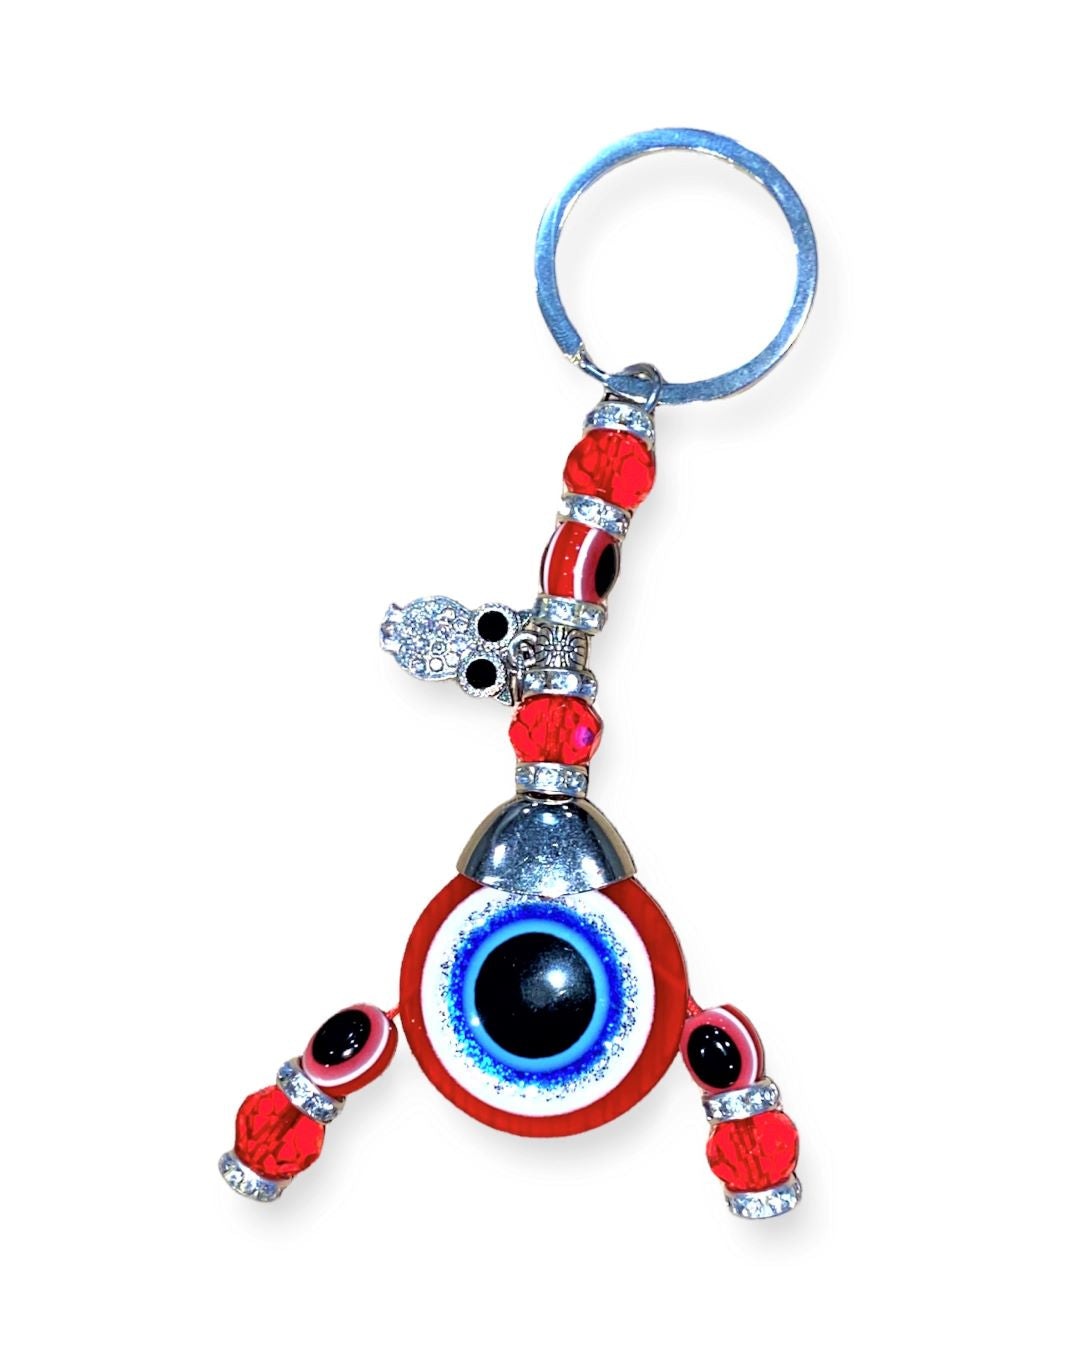 Red Owl Key Chain